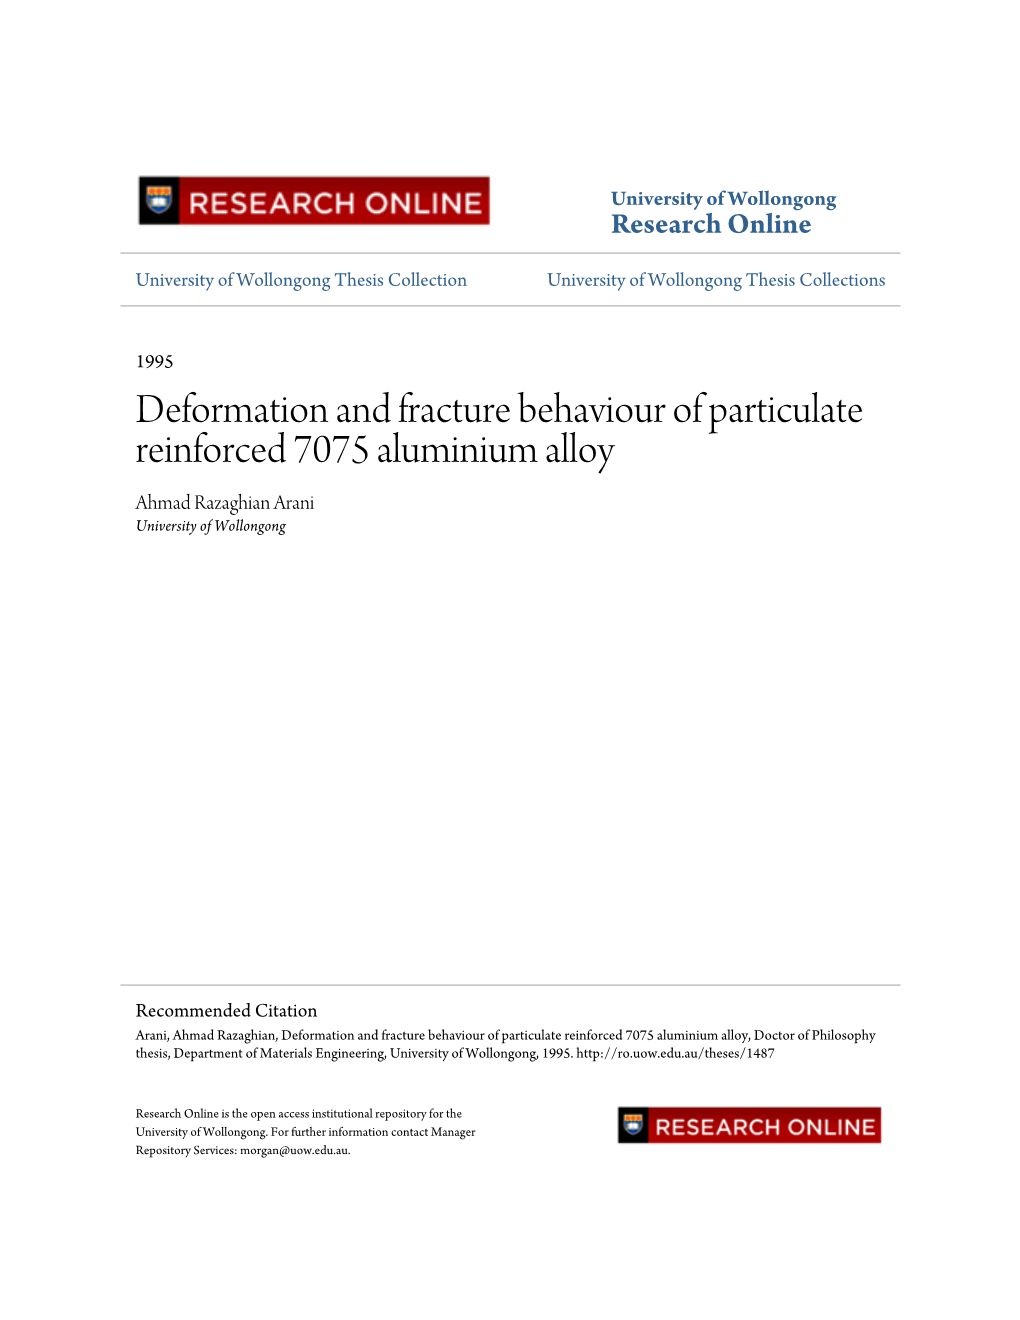 Deformation and Fracture Behaviour of Particulate Reinforced 7075 Aluminium Alloy Ahmad Razaghian Arani University of Wollongong